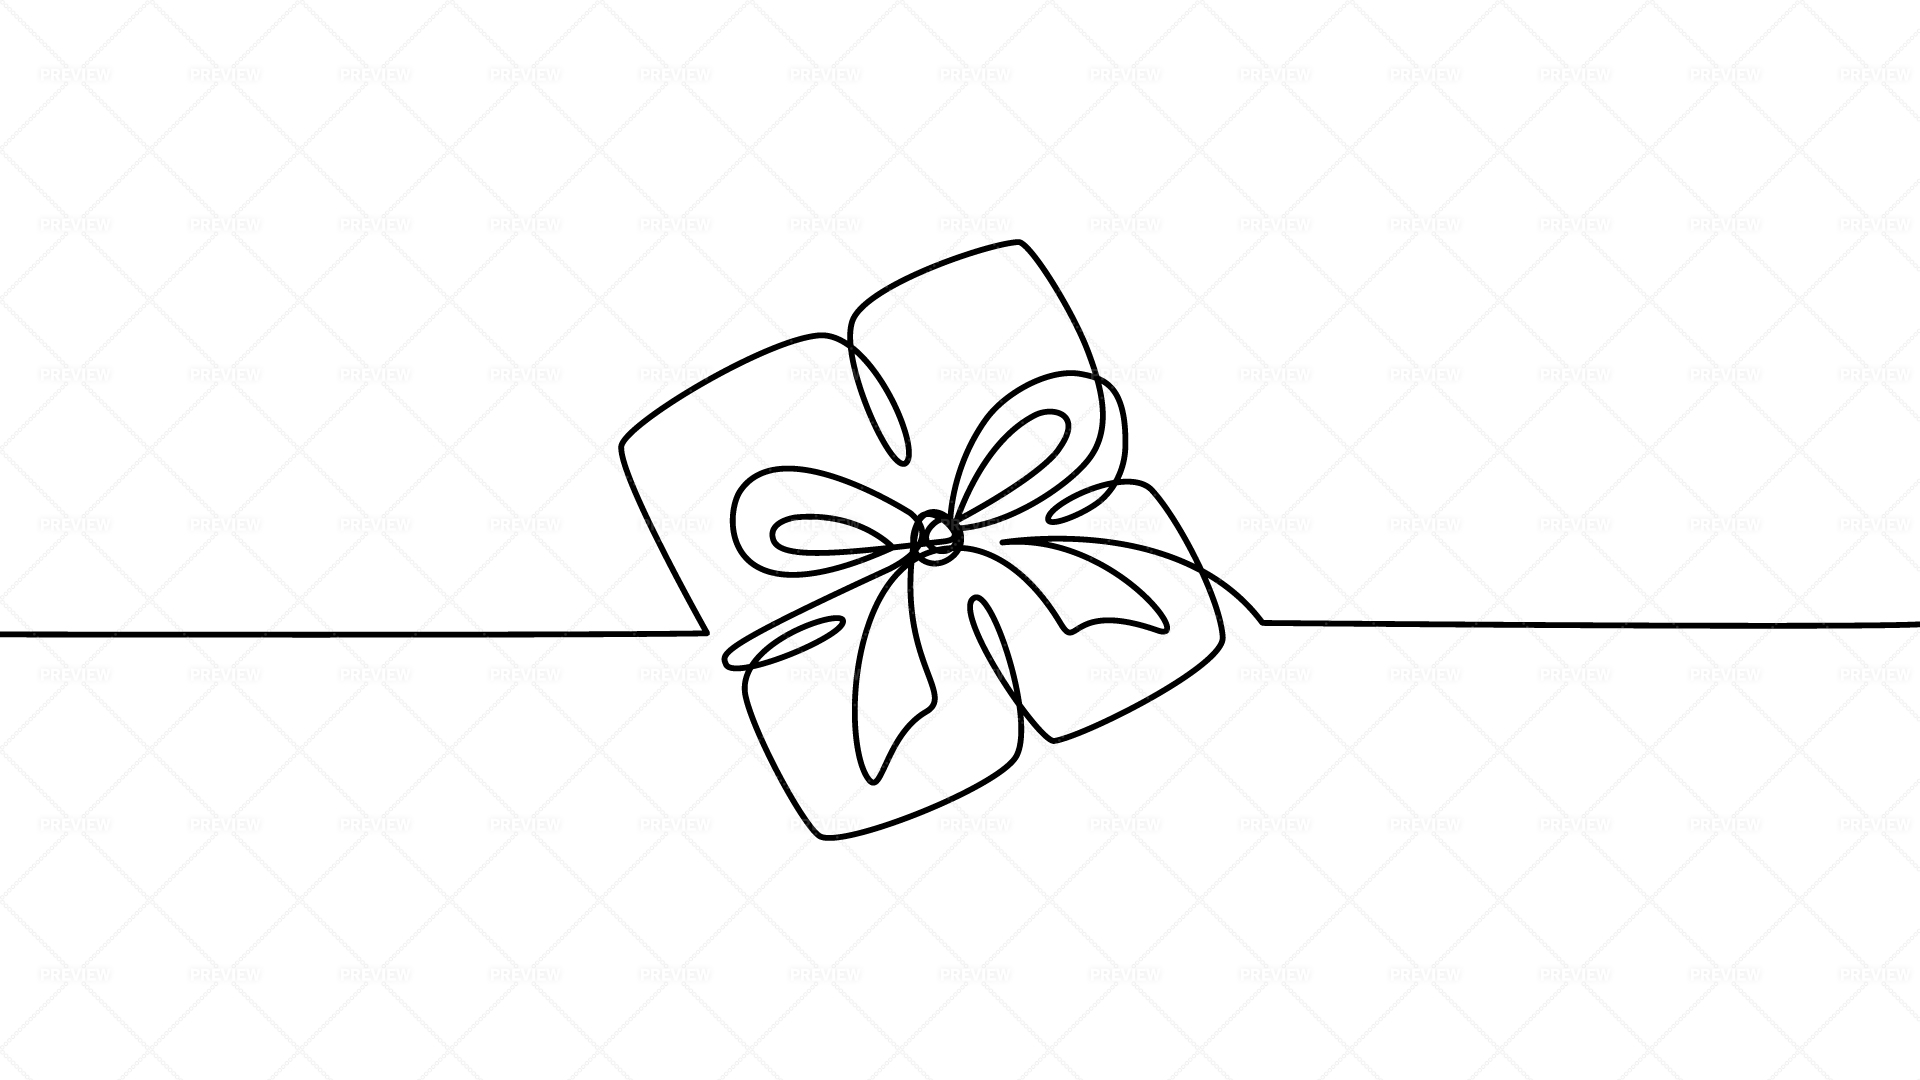 Drawing a Gift Box by Ahmed C. on Dribbble